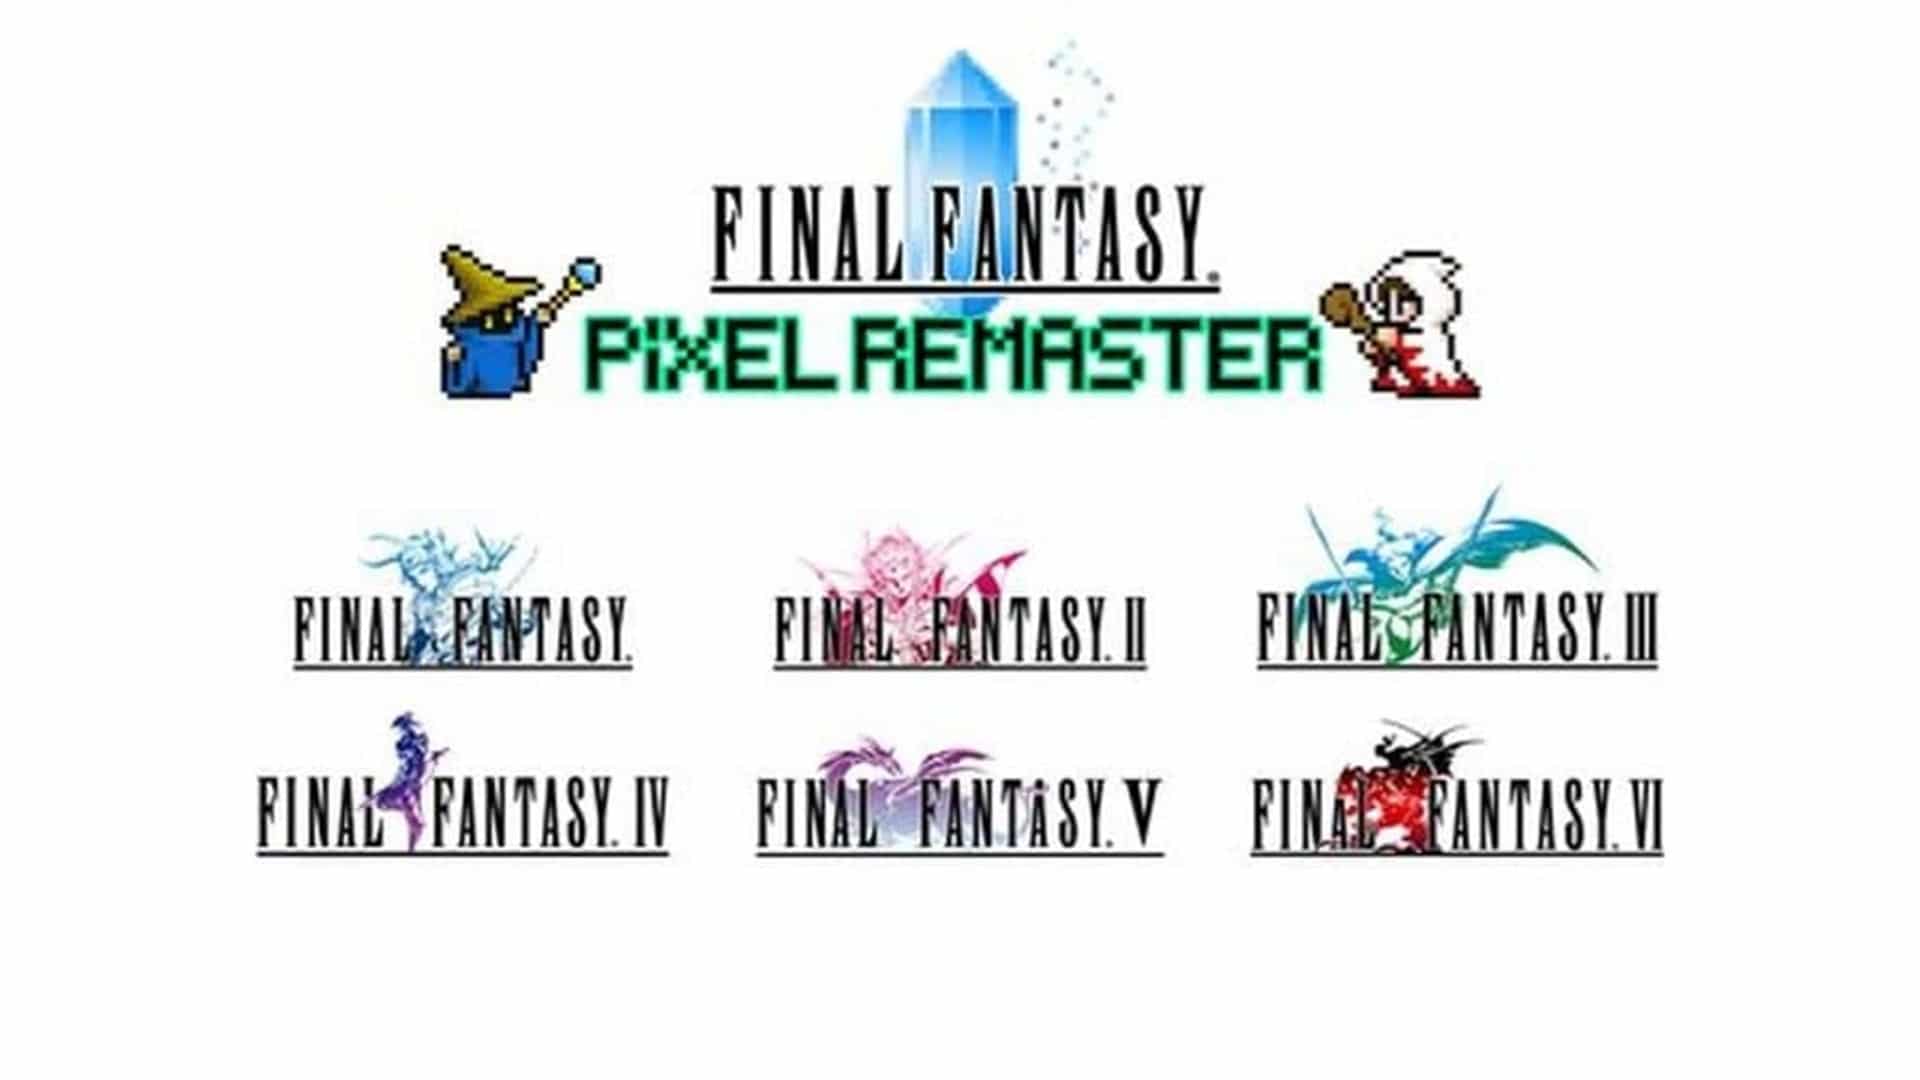 Final Fantasy Pixel Remaster Will Release For Switch In 2022 According To Rumor, GamersRD